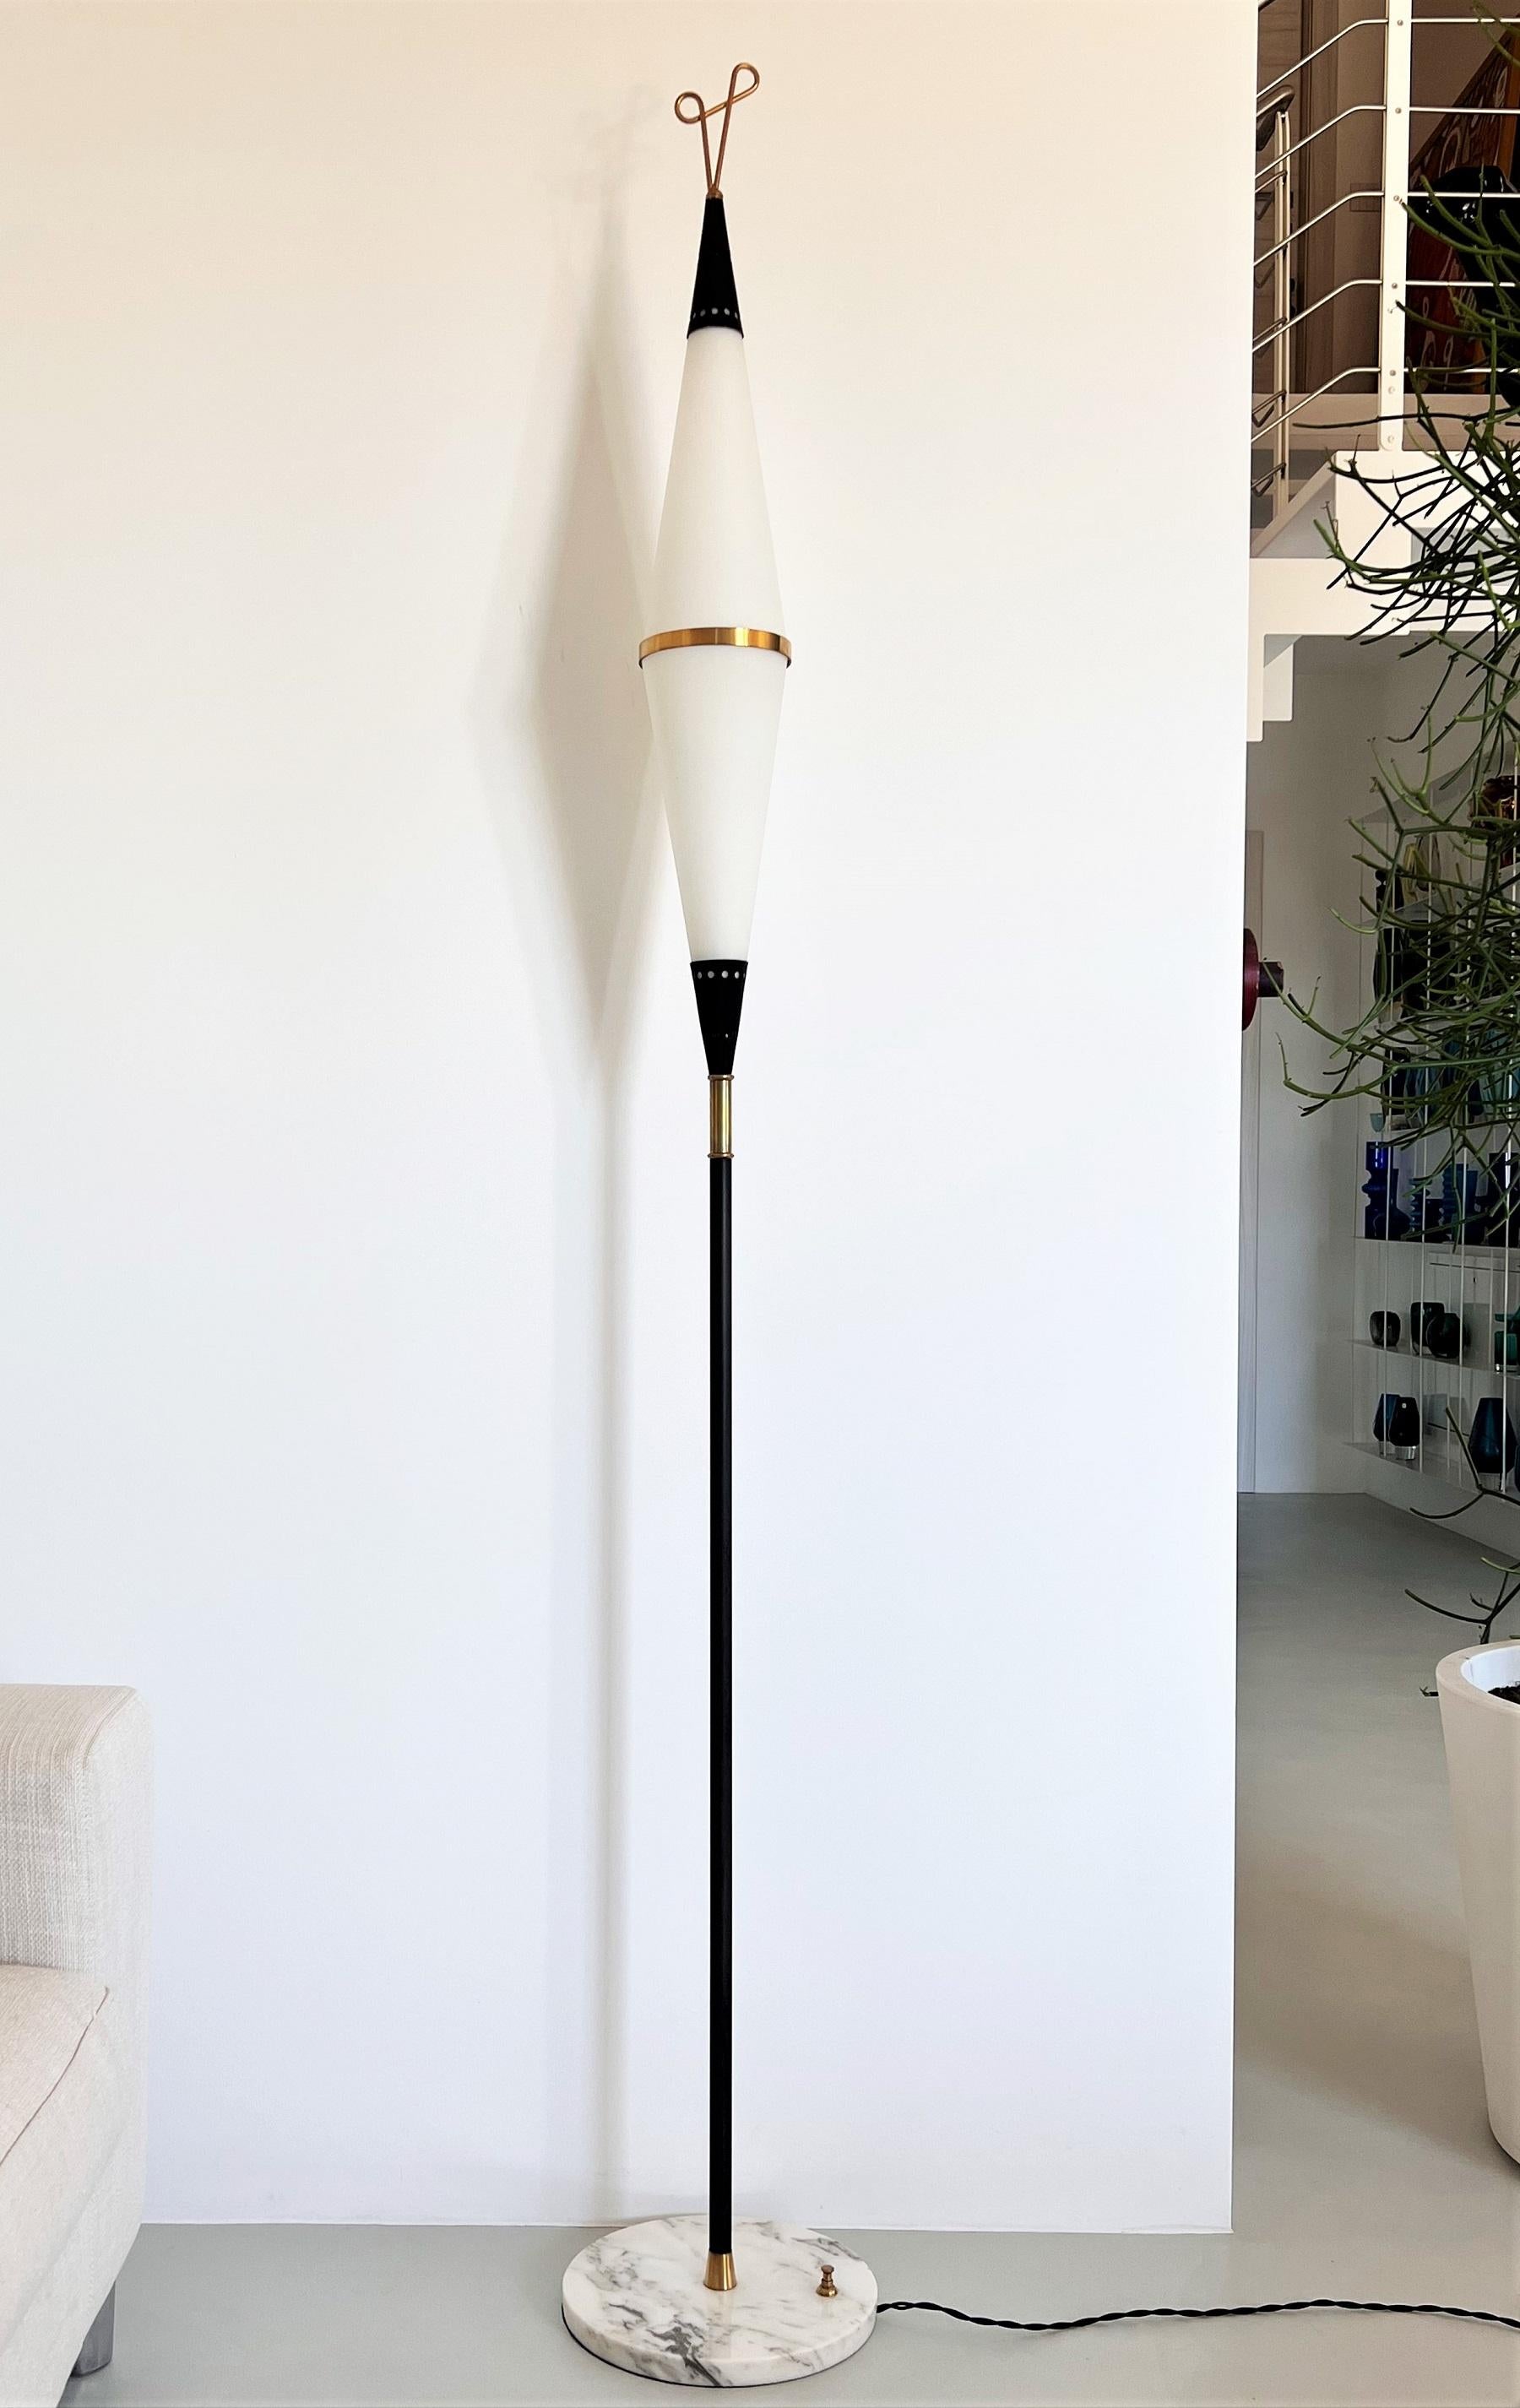 Italian Midcentury Floor Lamp in Glass, Brass and Marble by Reggiani, 1960s For Sale 6